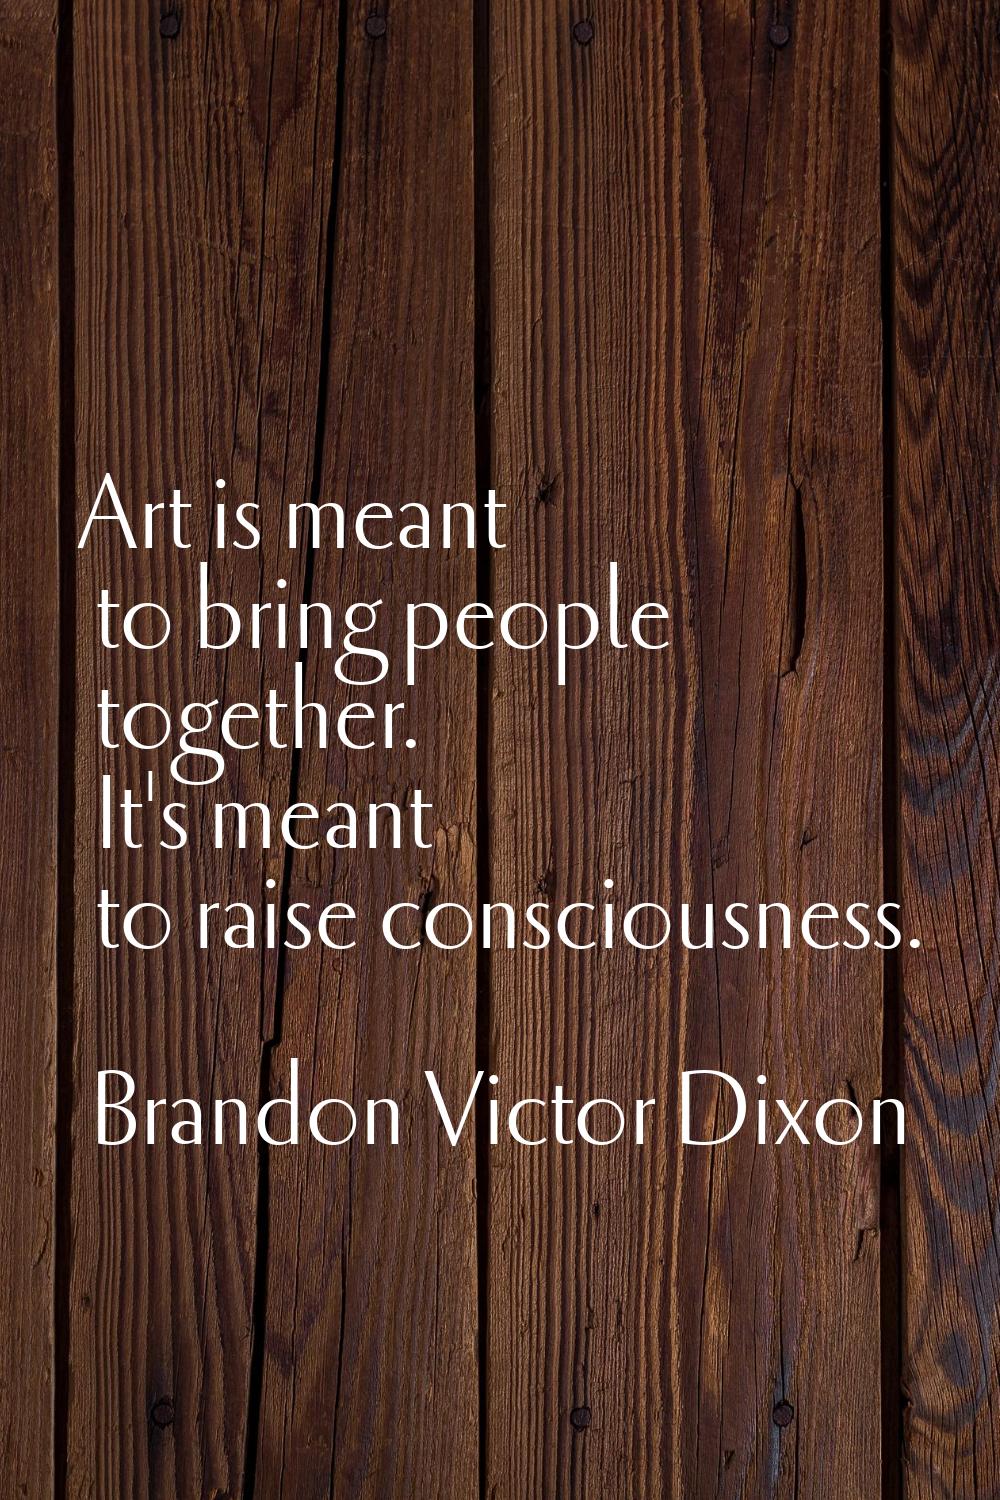 Art is meant to bring people together. It's meant to raise consciousness.